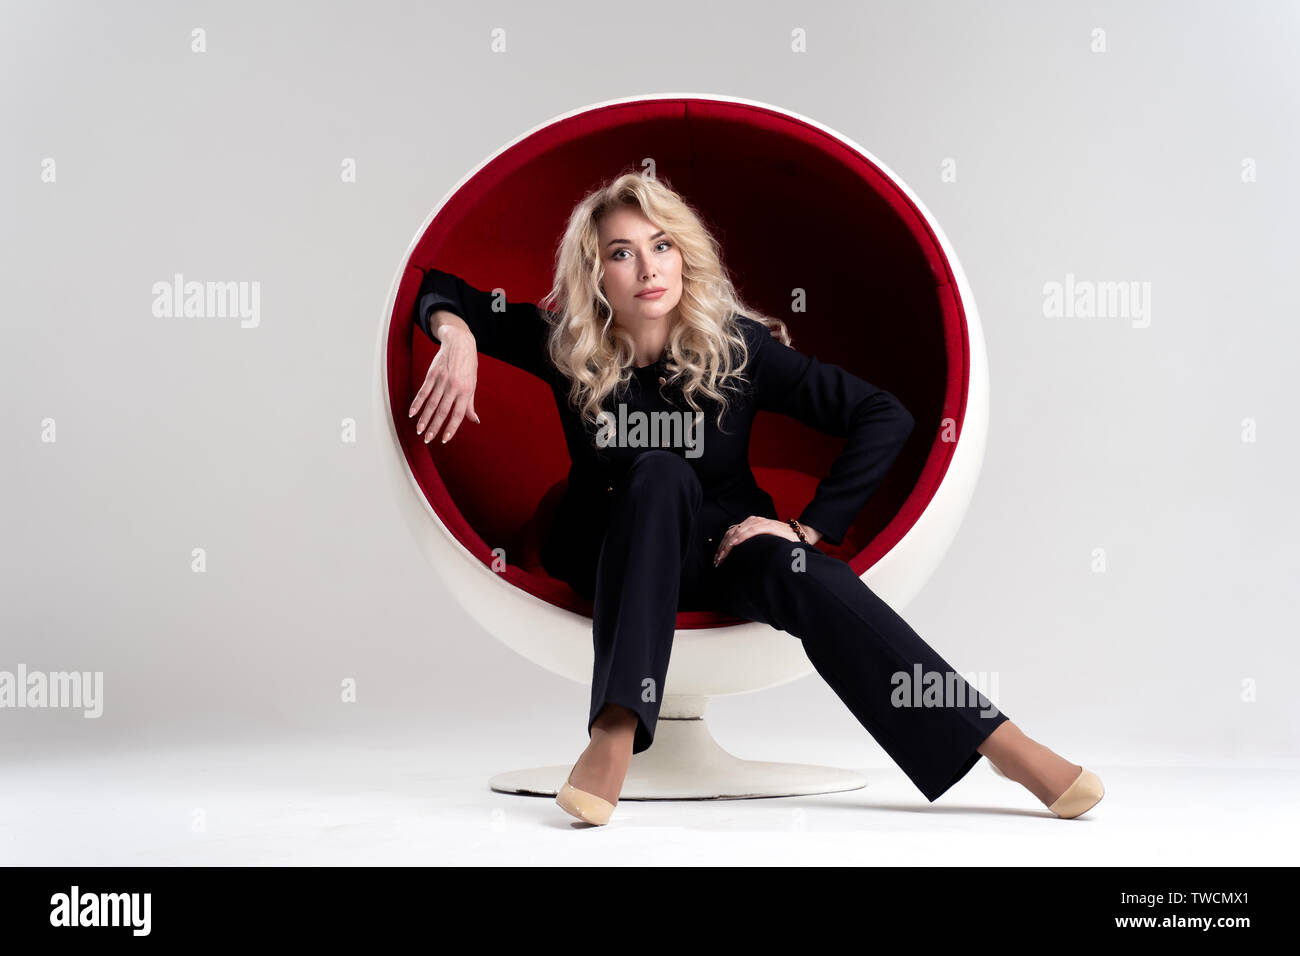 Photo of blonde woman with long curly hair in black suit and beige shoes looking in camera while sitting in round chair isolated on white background Stock Photo